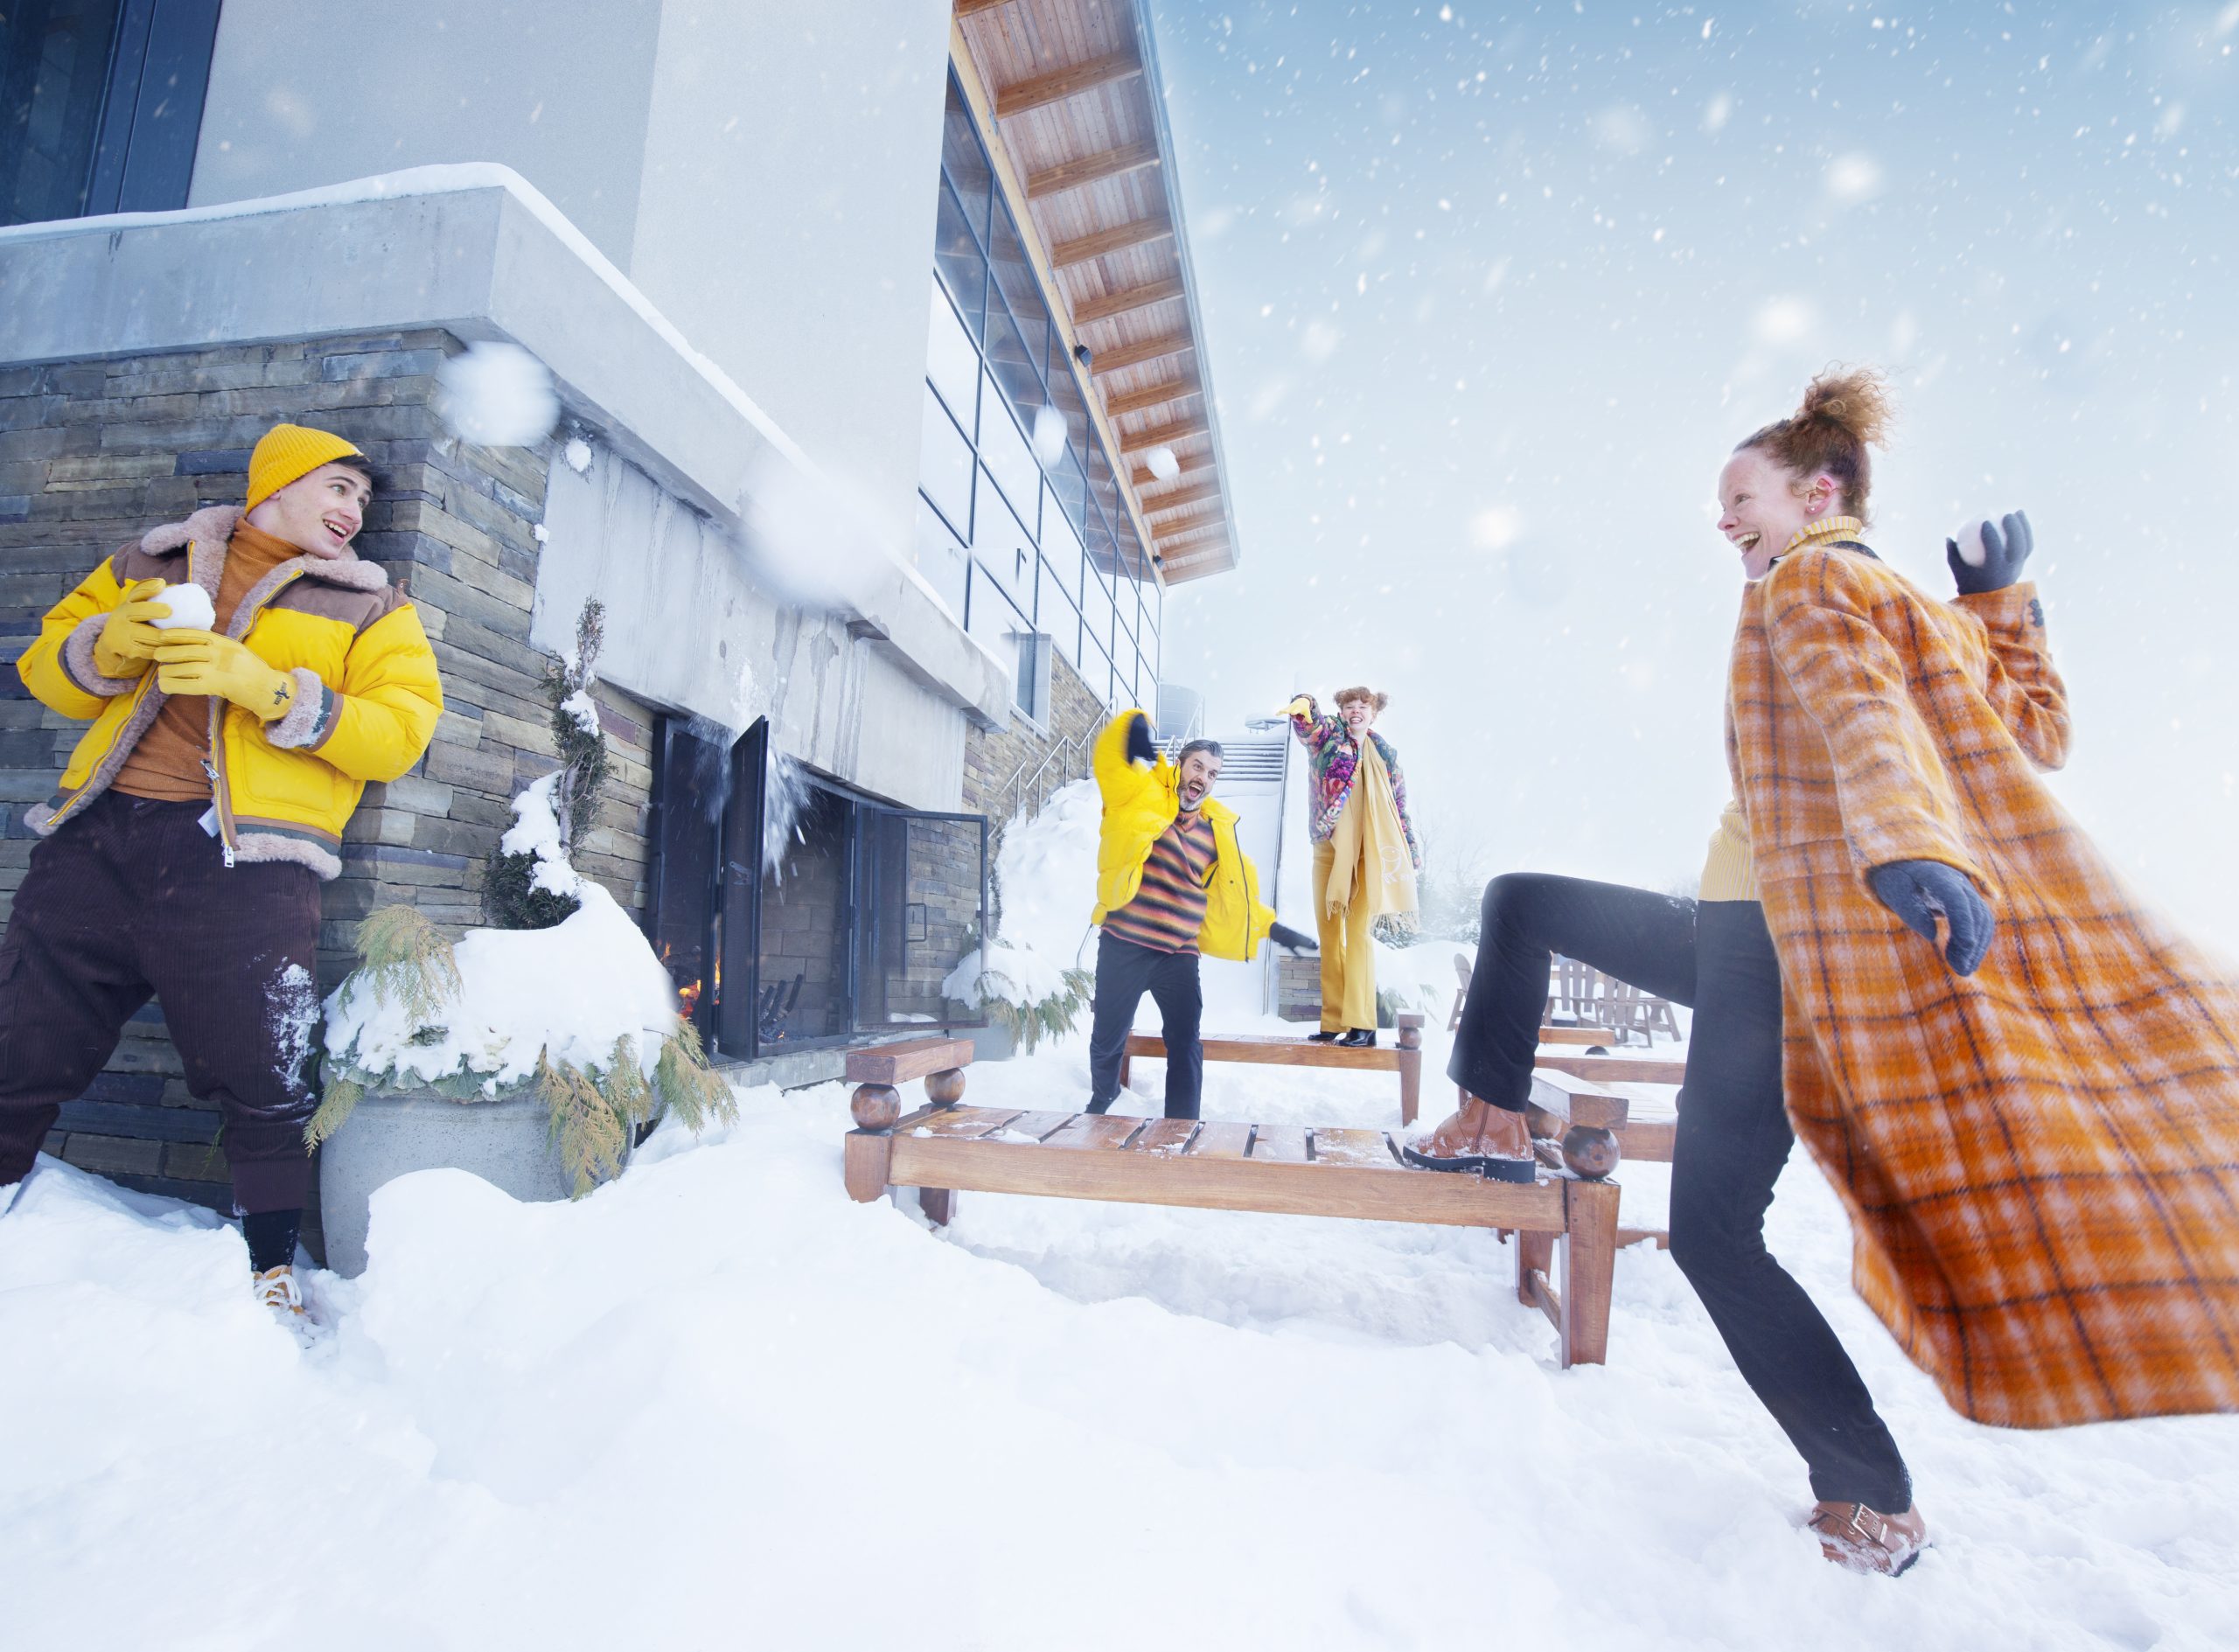 4 people having a snowball fight